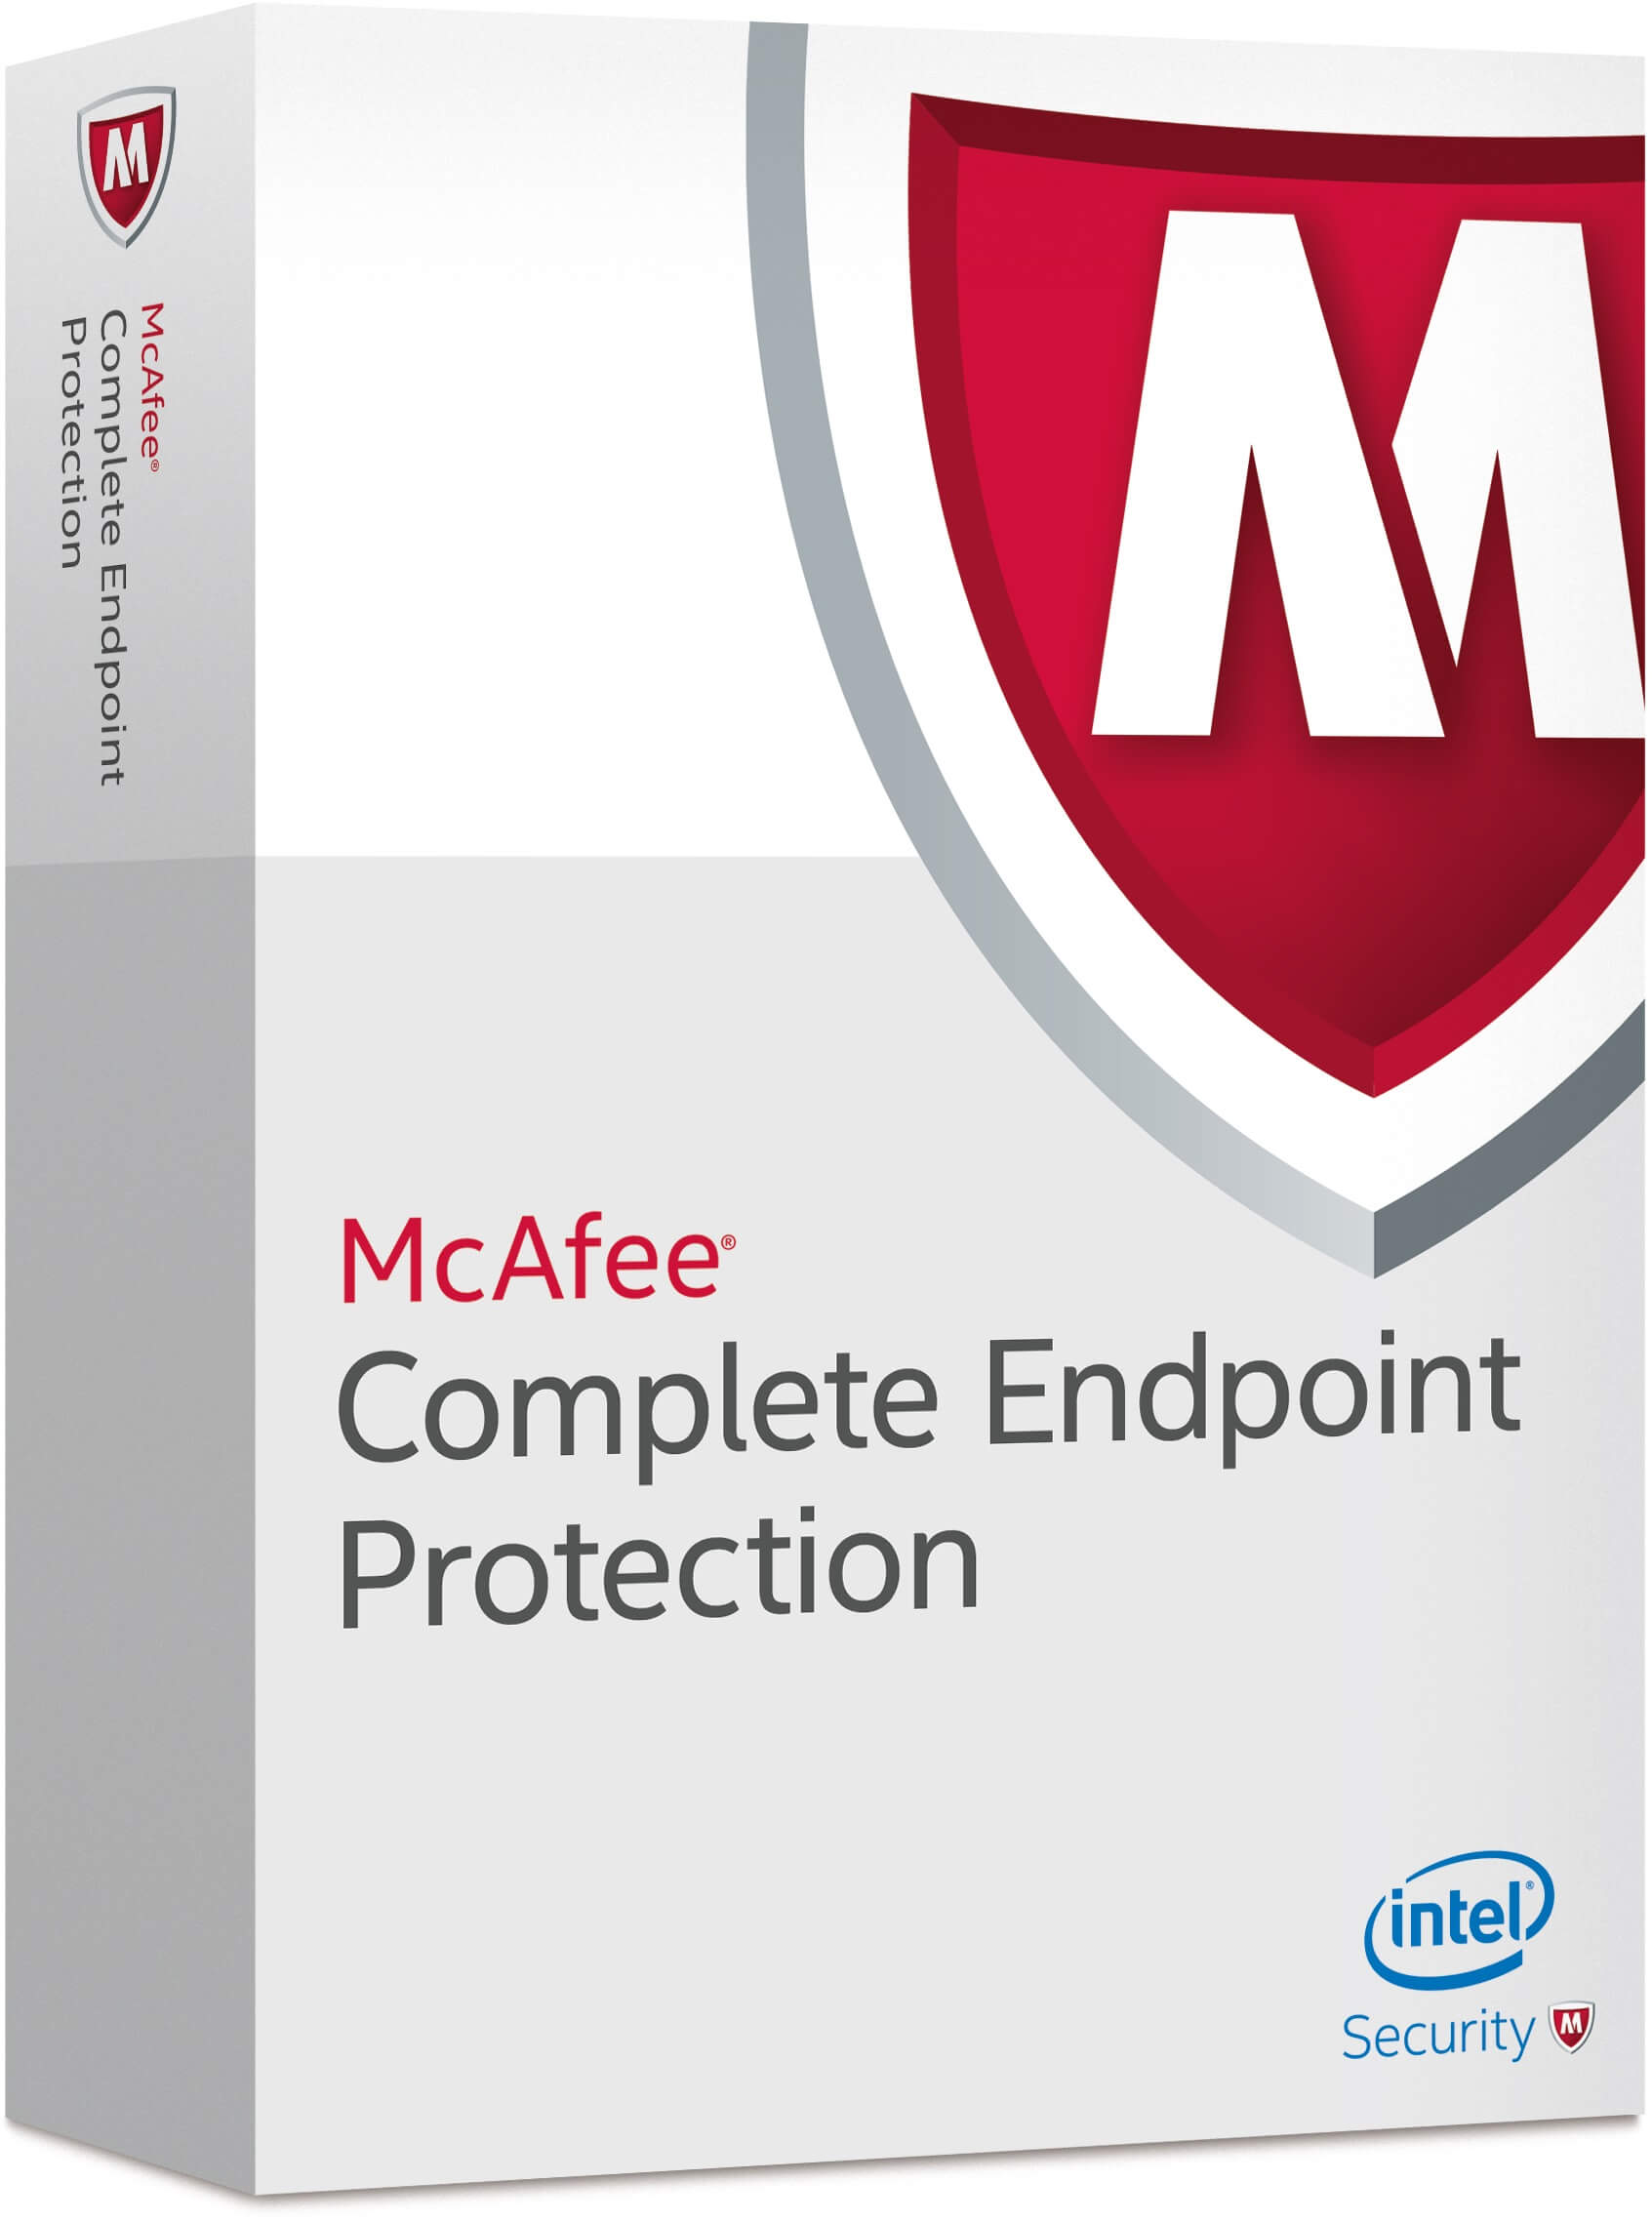 Trellix McAfee Complete EndPoint Protection - Business inkl. 1 Jahr Gold Support Win, Multilingual (Lizenzstaffel 5-25 User) (CEBCDE-AA-AA)